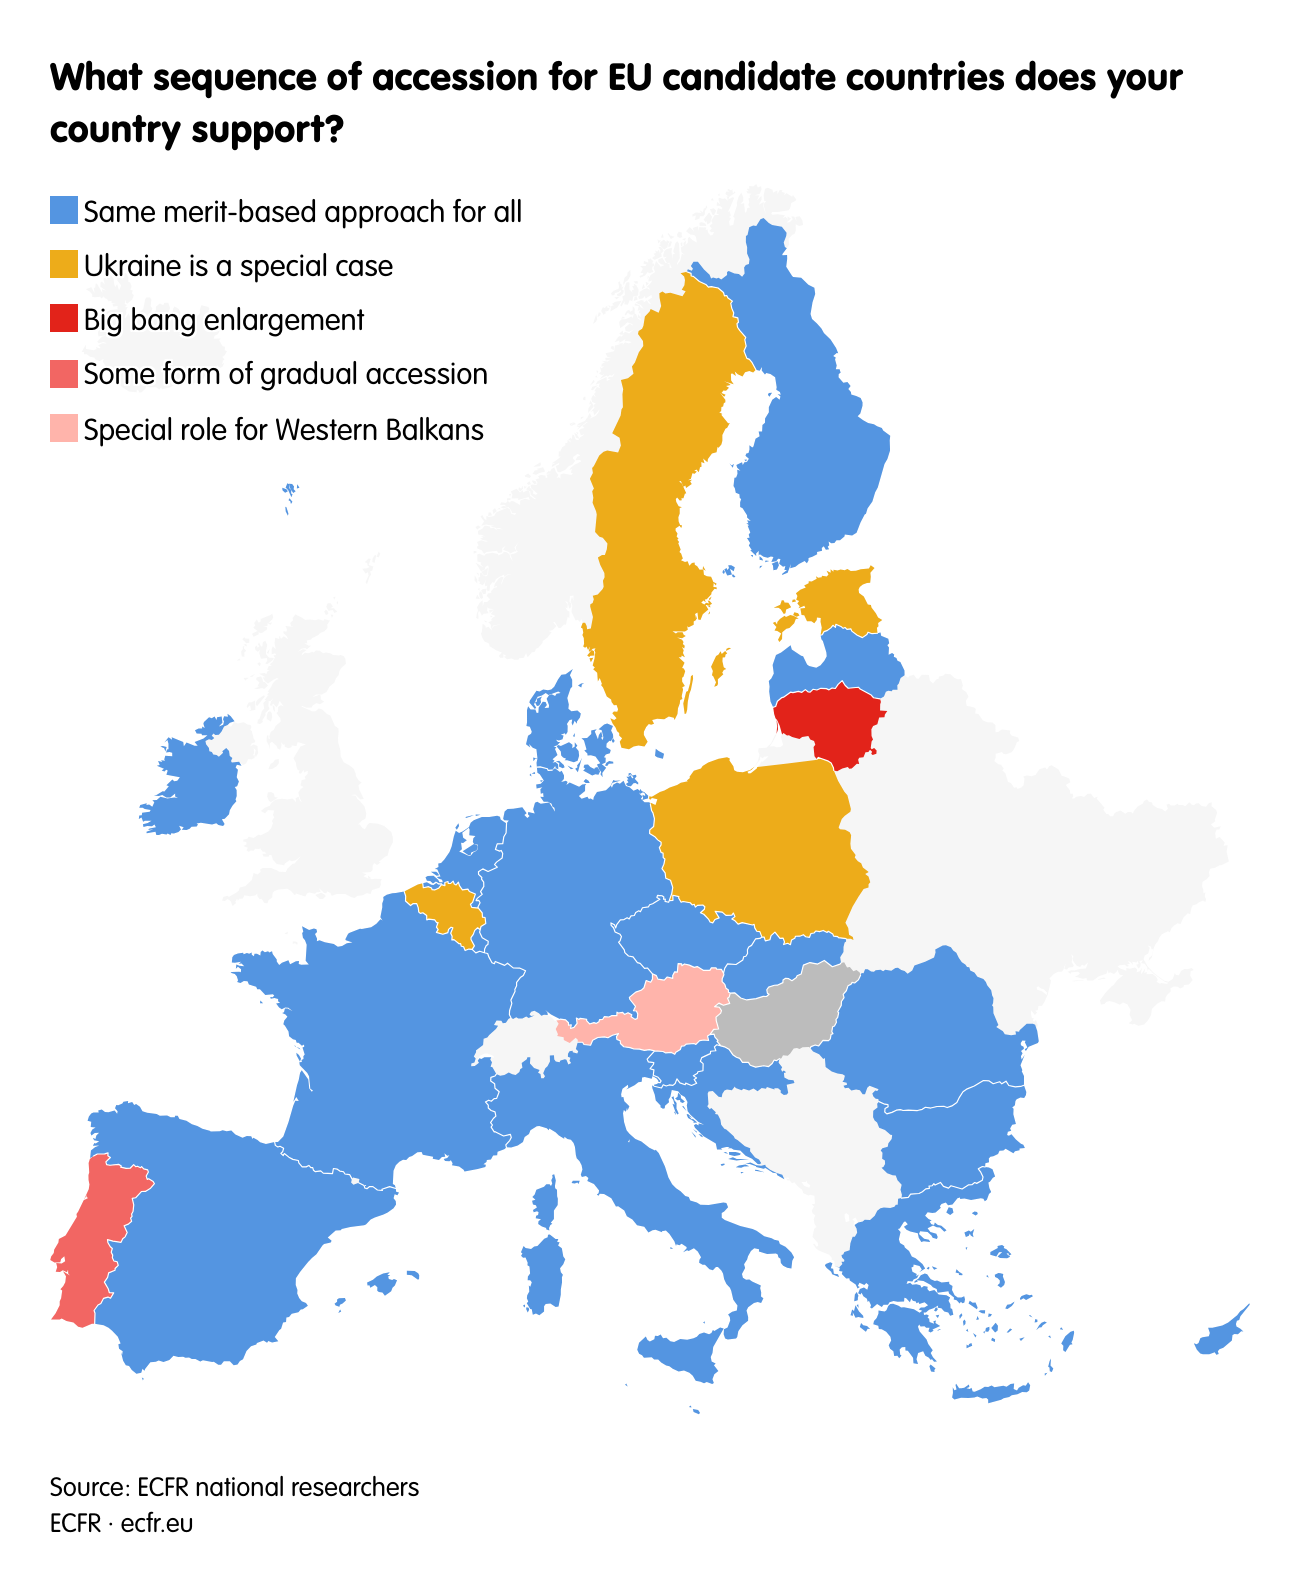 What sequence of accession for EU candidate countries does your country support?